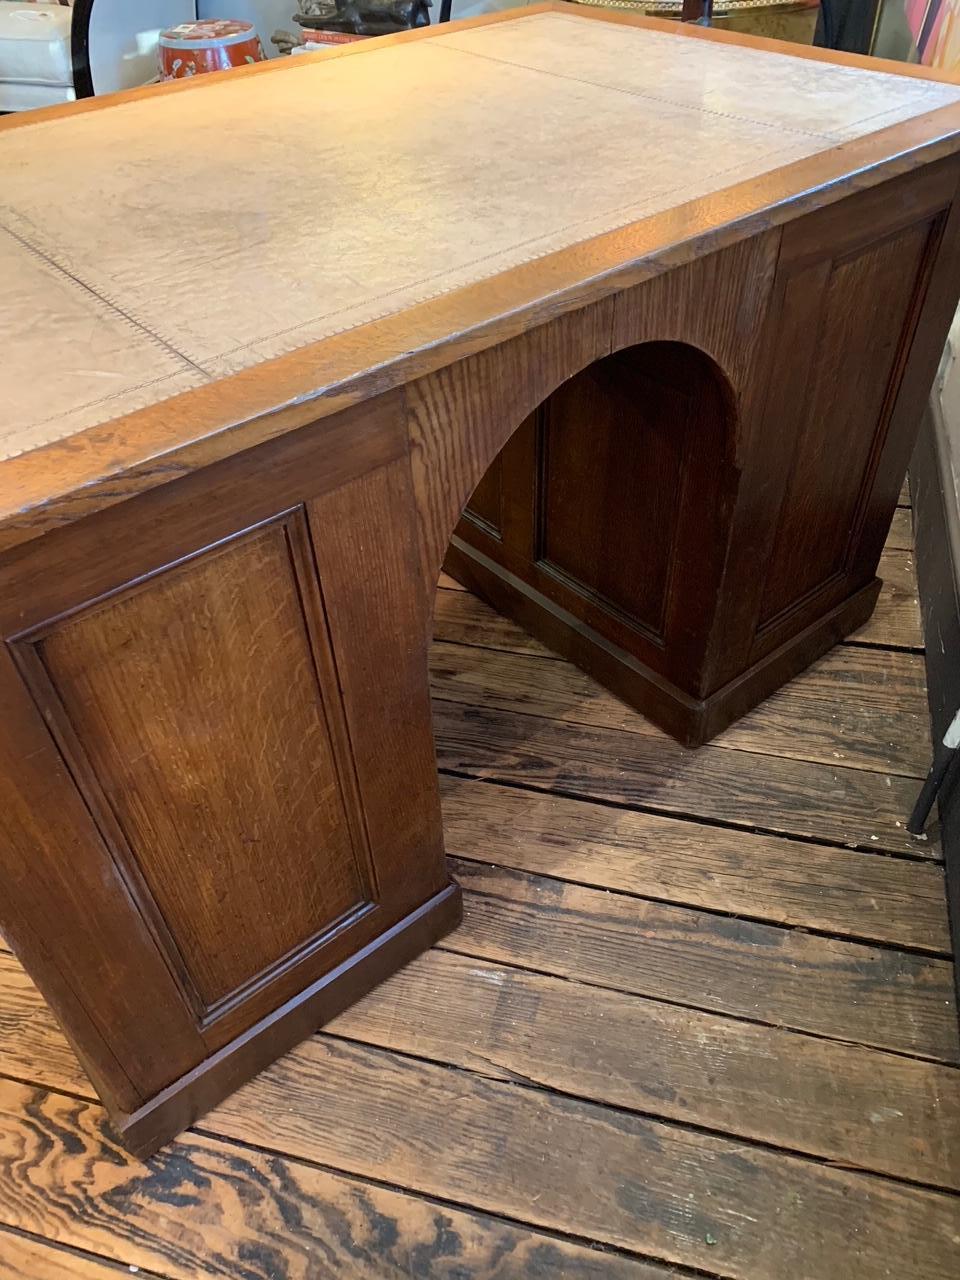 Handsome English double pedestal desk with grain painted, paneled sides, arched front, and 4 drawers in each pedestal on one side. Tooled light tan leather top in good condition.
From the estate of a prominent New England decorator.

Measures: